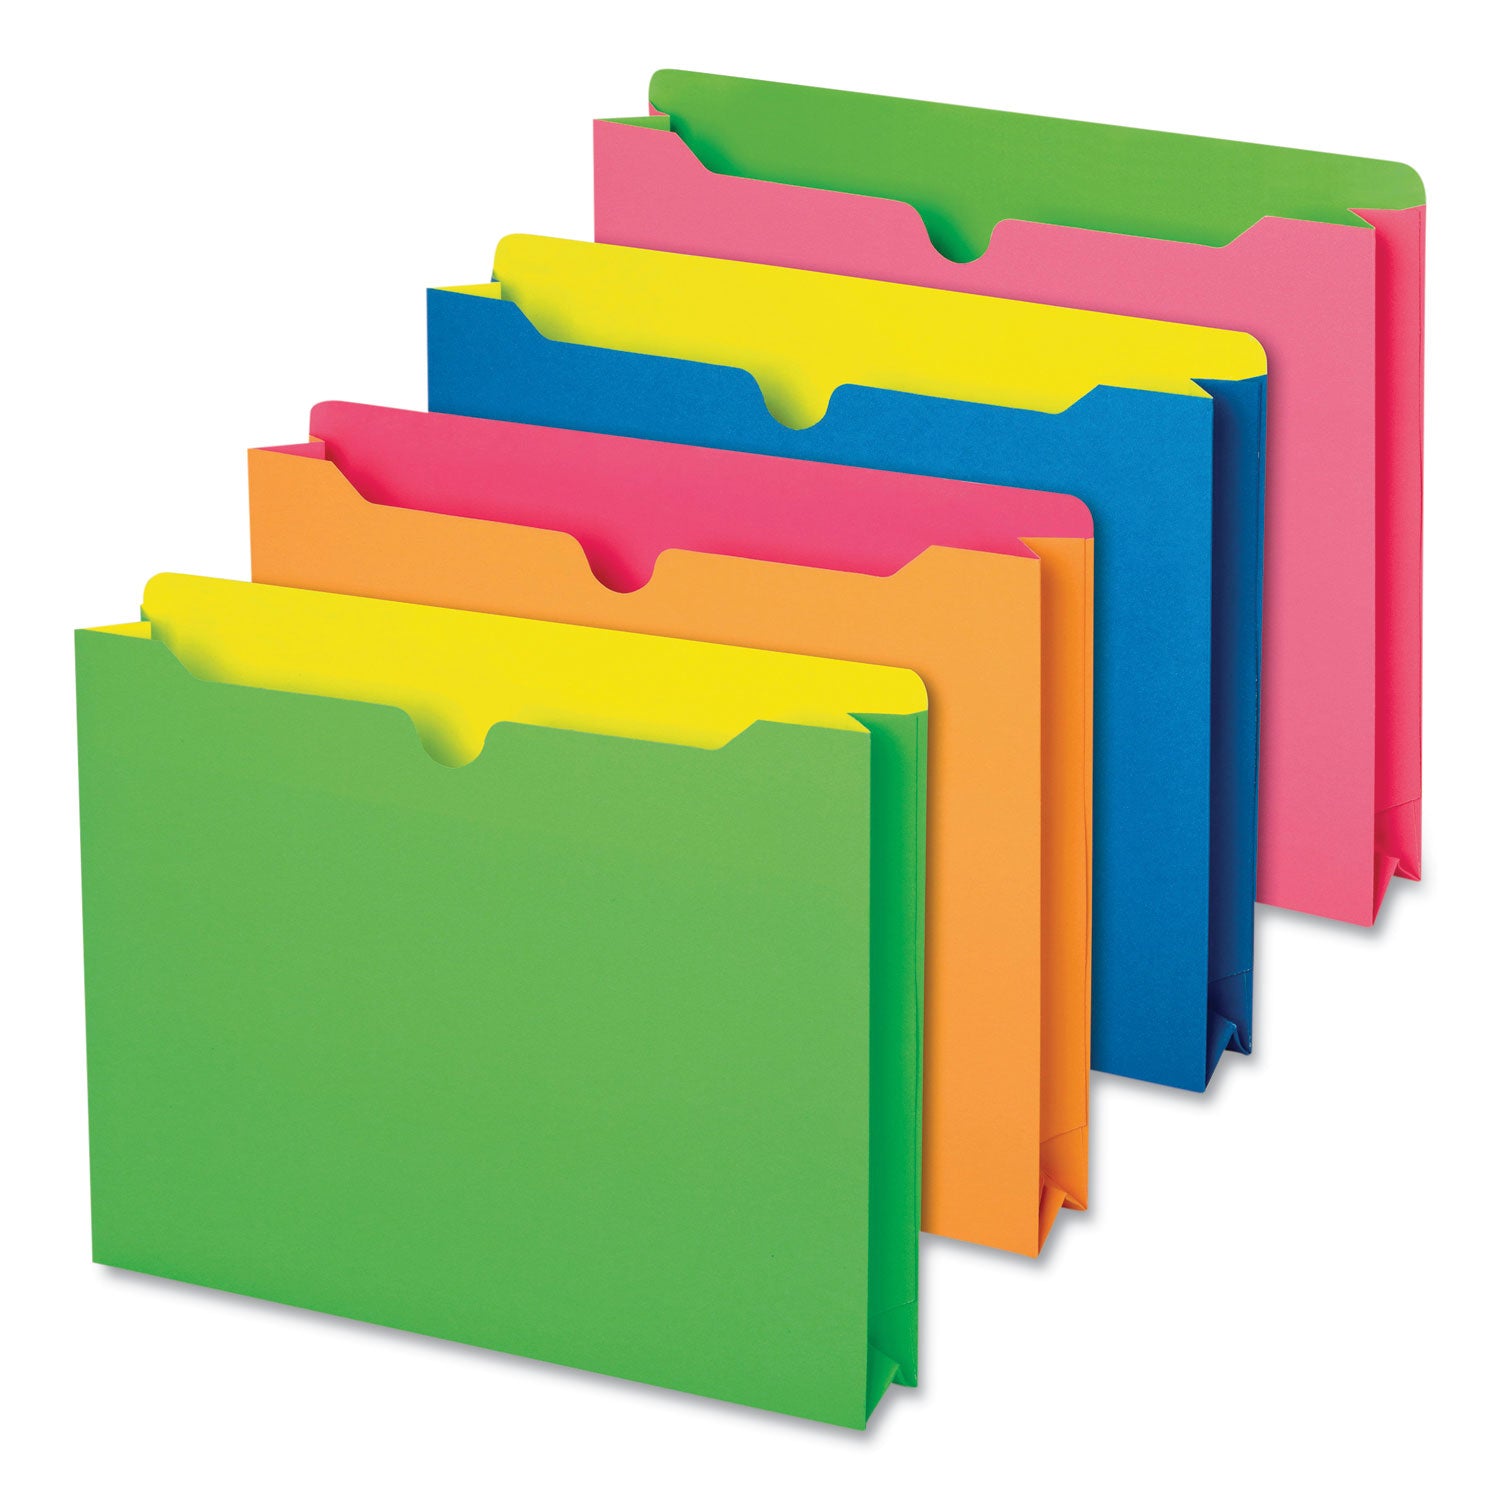 twisted-glow-paper-file-jacket-2-expansion-straight-top-tab-letter-size-assorted-colors-10-pack_pfx49501 - 1